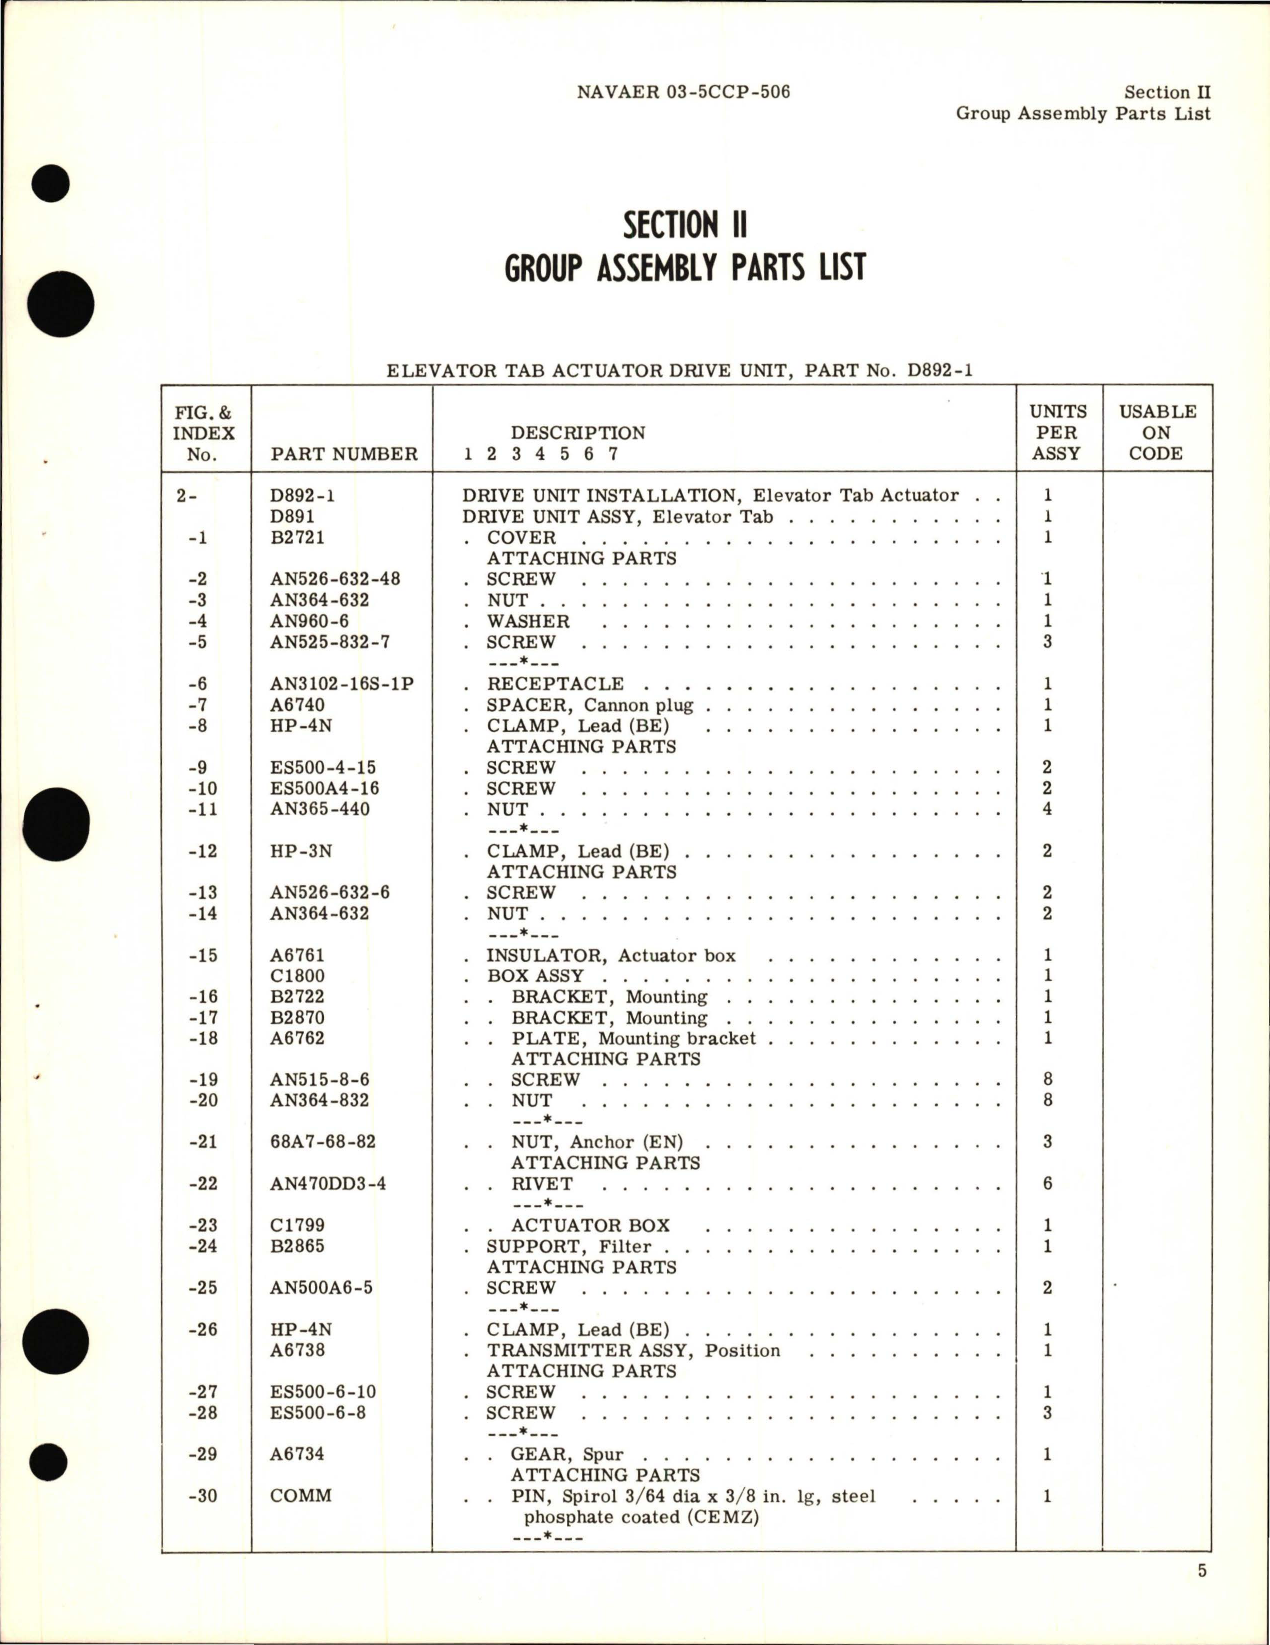 Sample page 7 from AirCorps Library document: Illustrated Parts Breakdown for Elevator Tab Actuator Drive Unit - Part D892-1